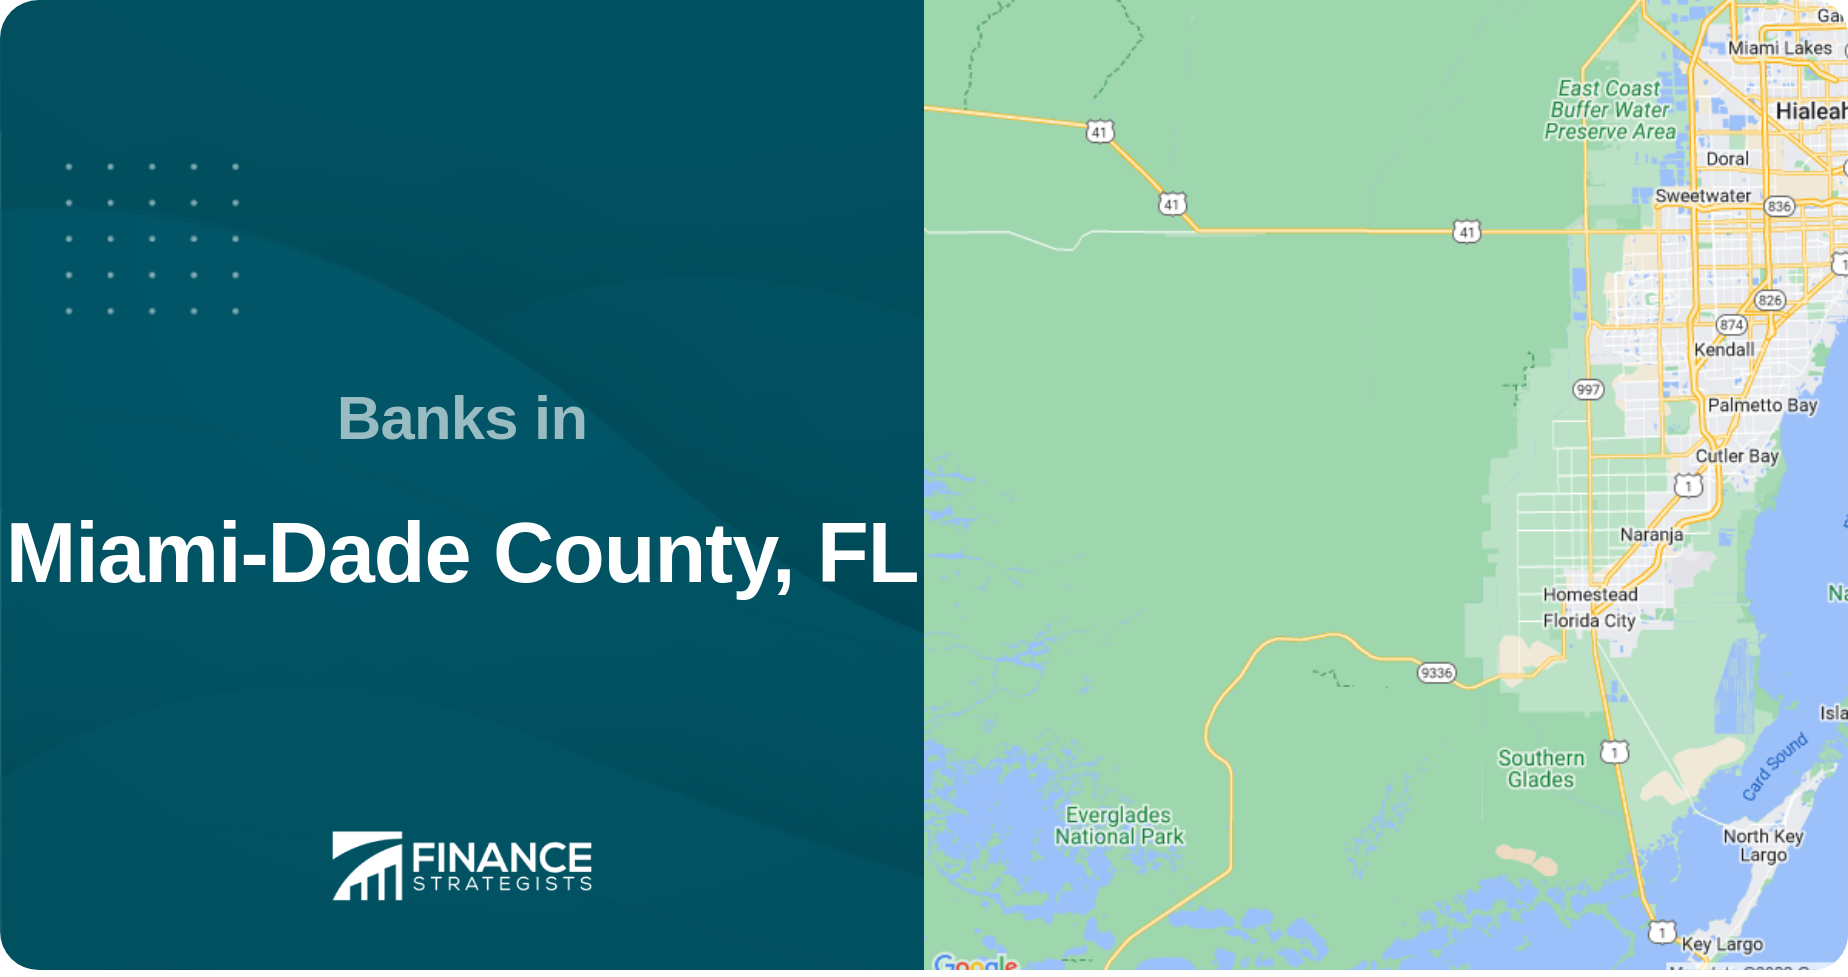 Banks in Miami-Dade County, FL